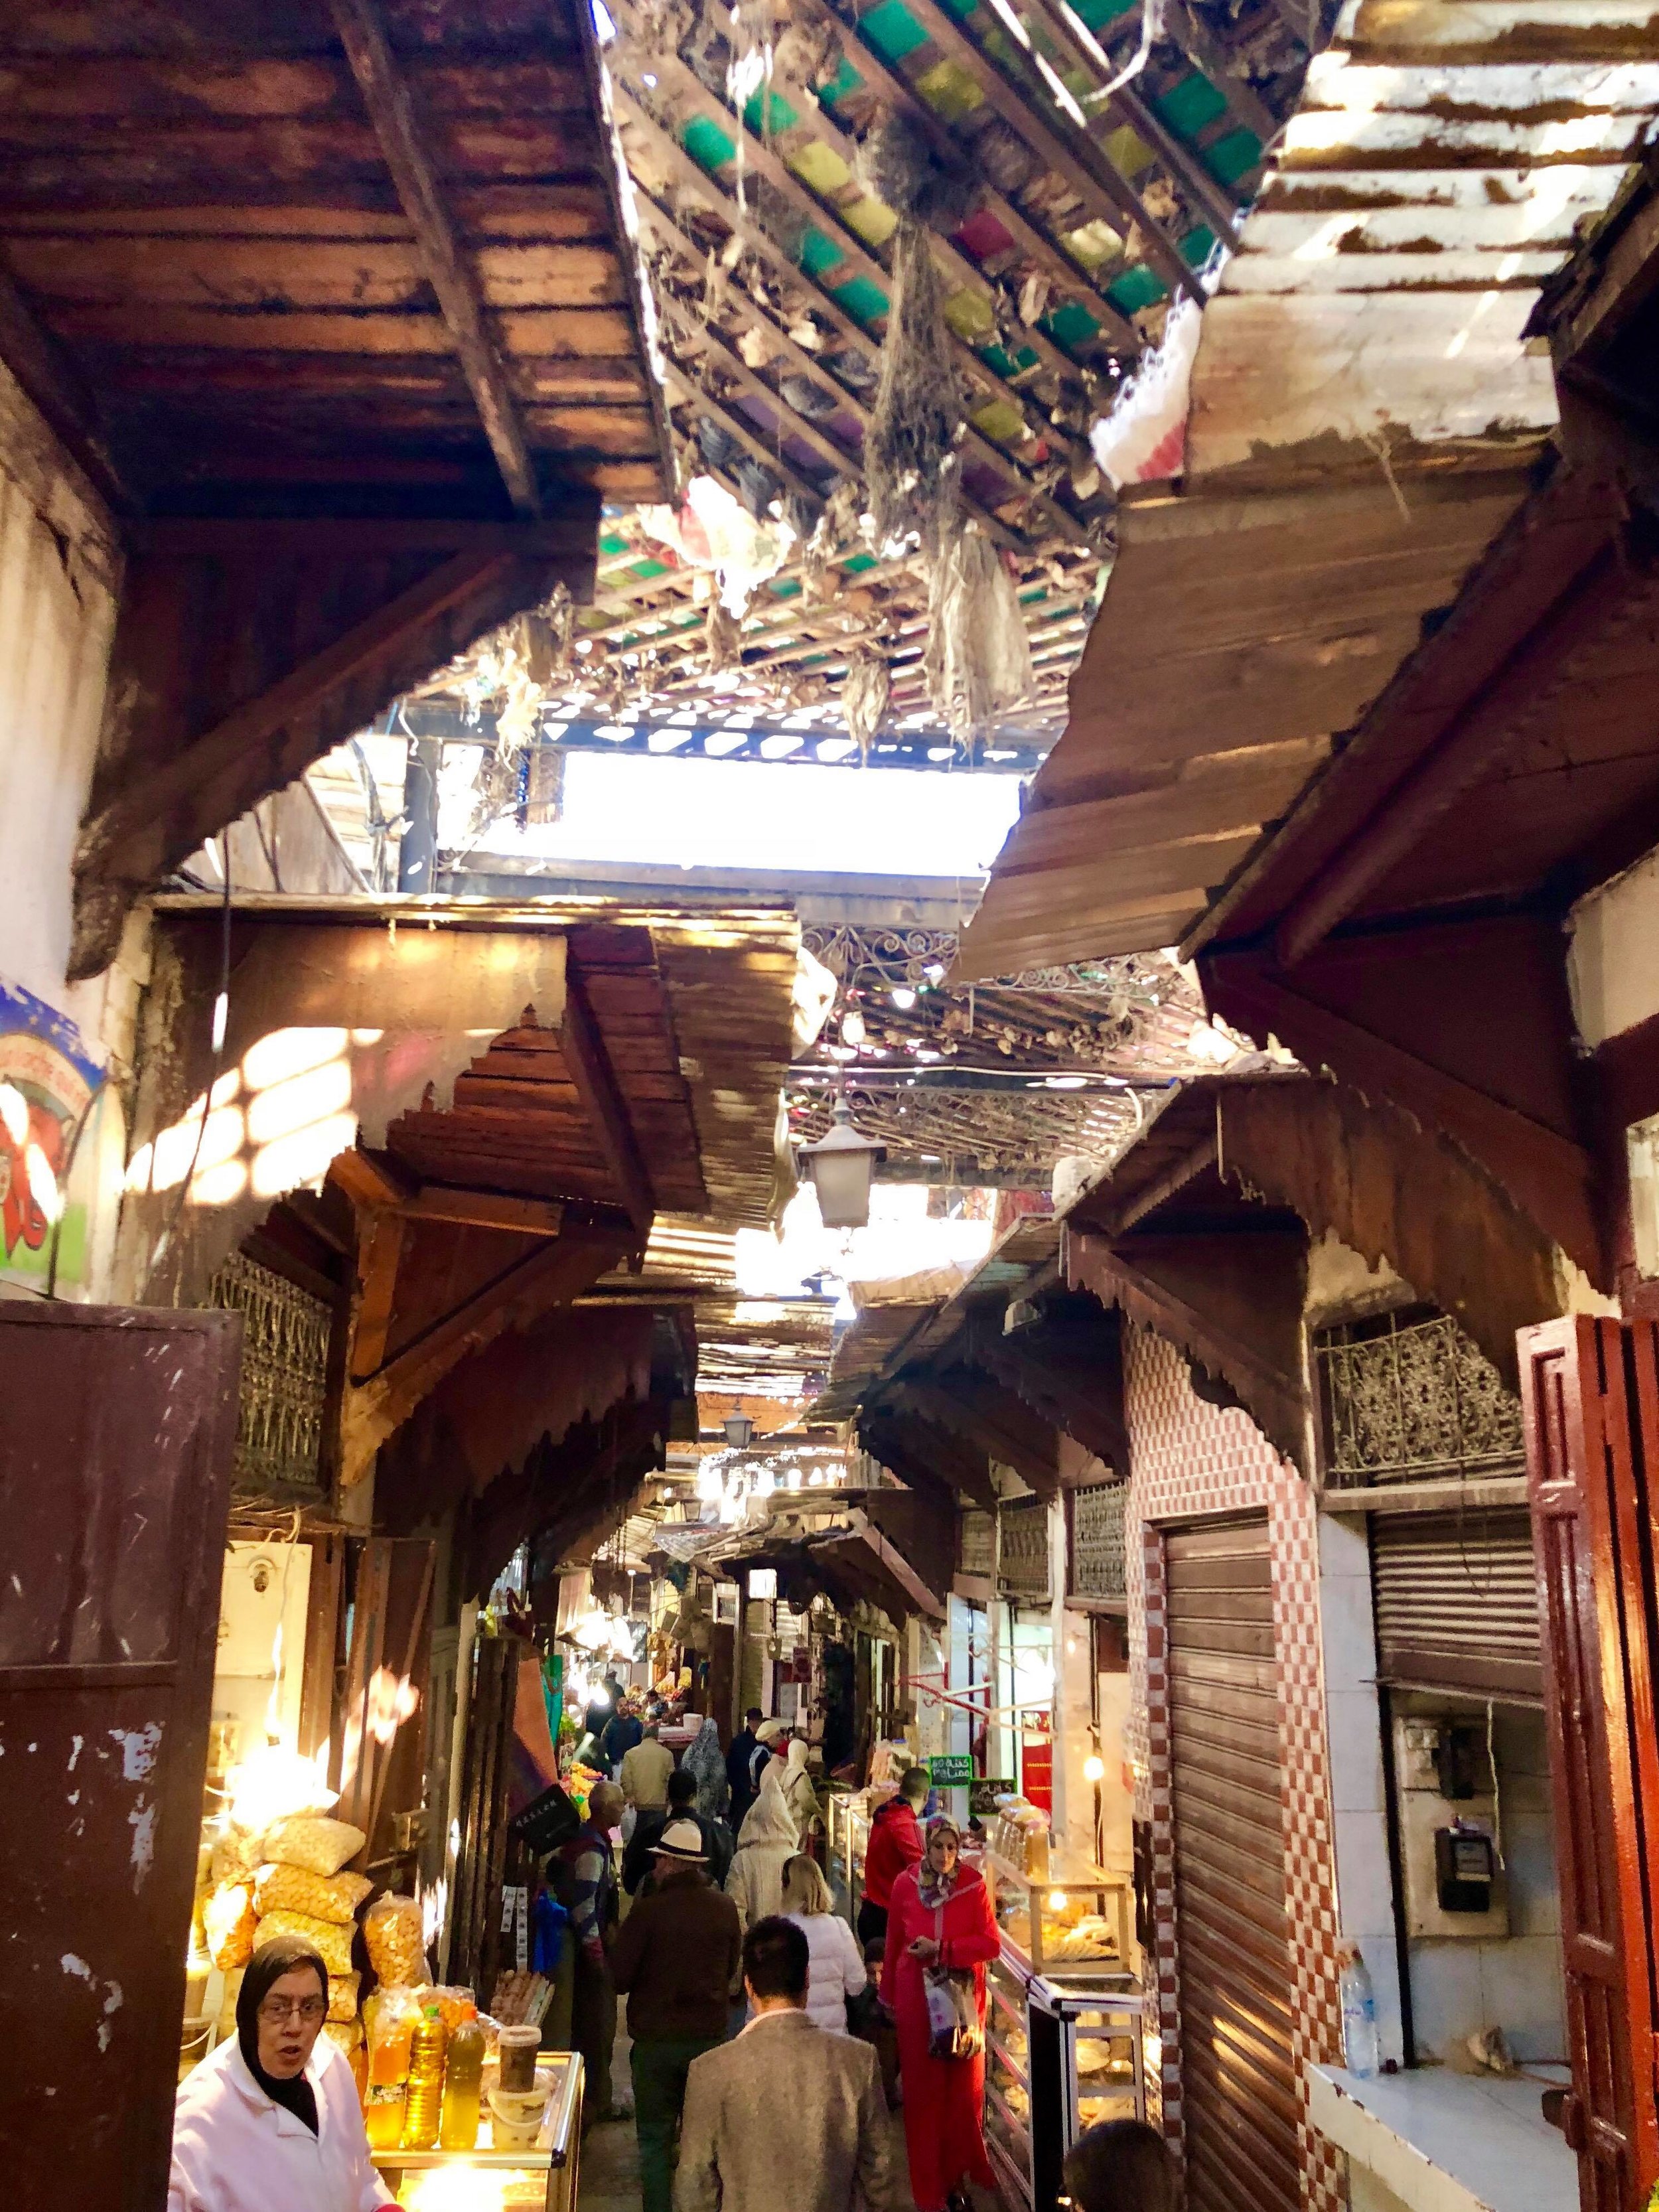  This alleyway seems to be one of Laundromats, whom wash and dry batches of clothing on the streets and inside the courtyards. 